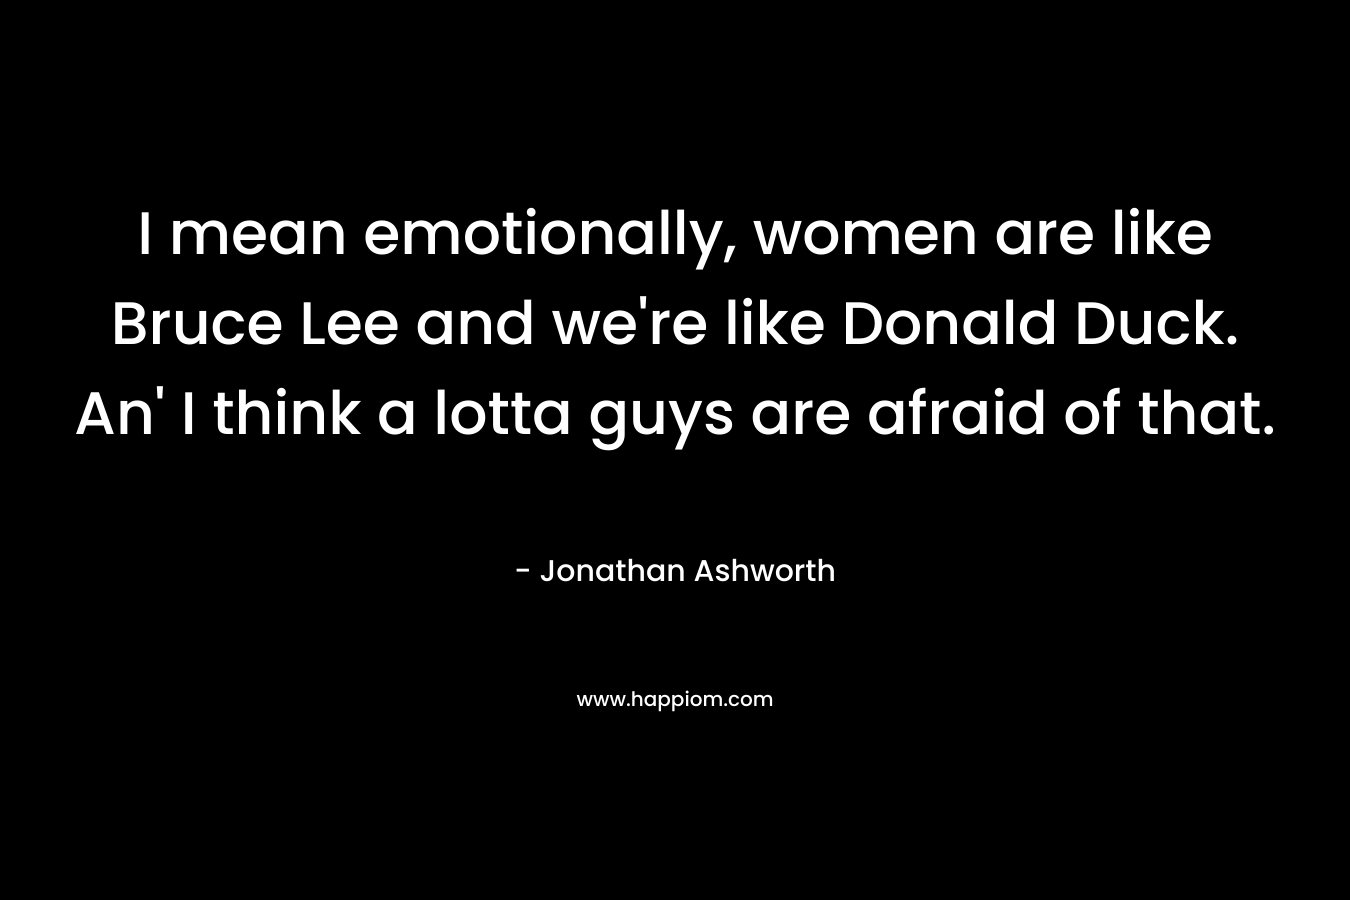 I mean emotionally, women are like Bruce Lee and we're like Donald Duck. An' I think a lotta guys are afraid of that.